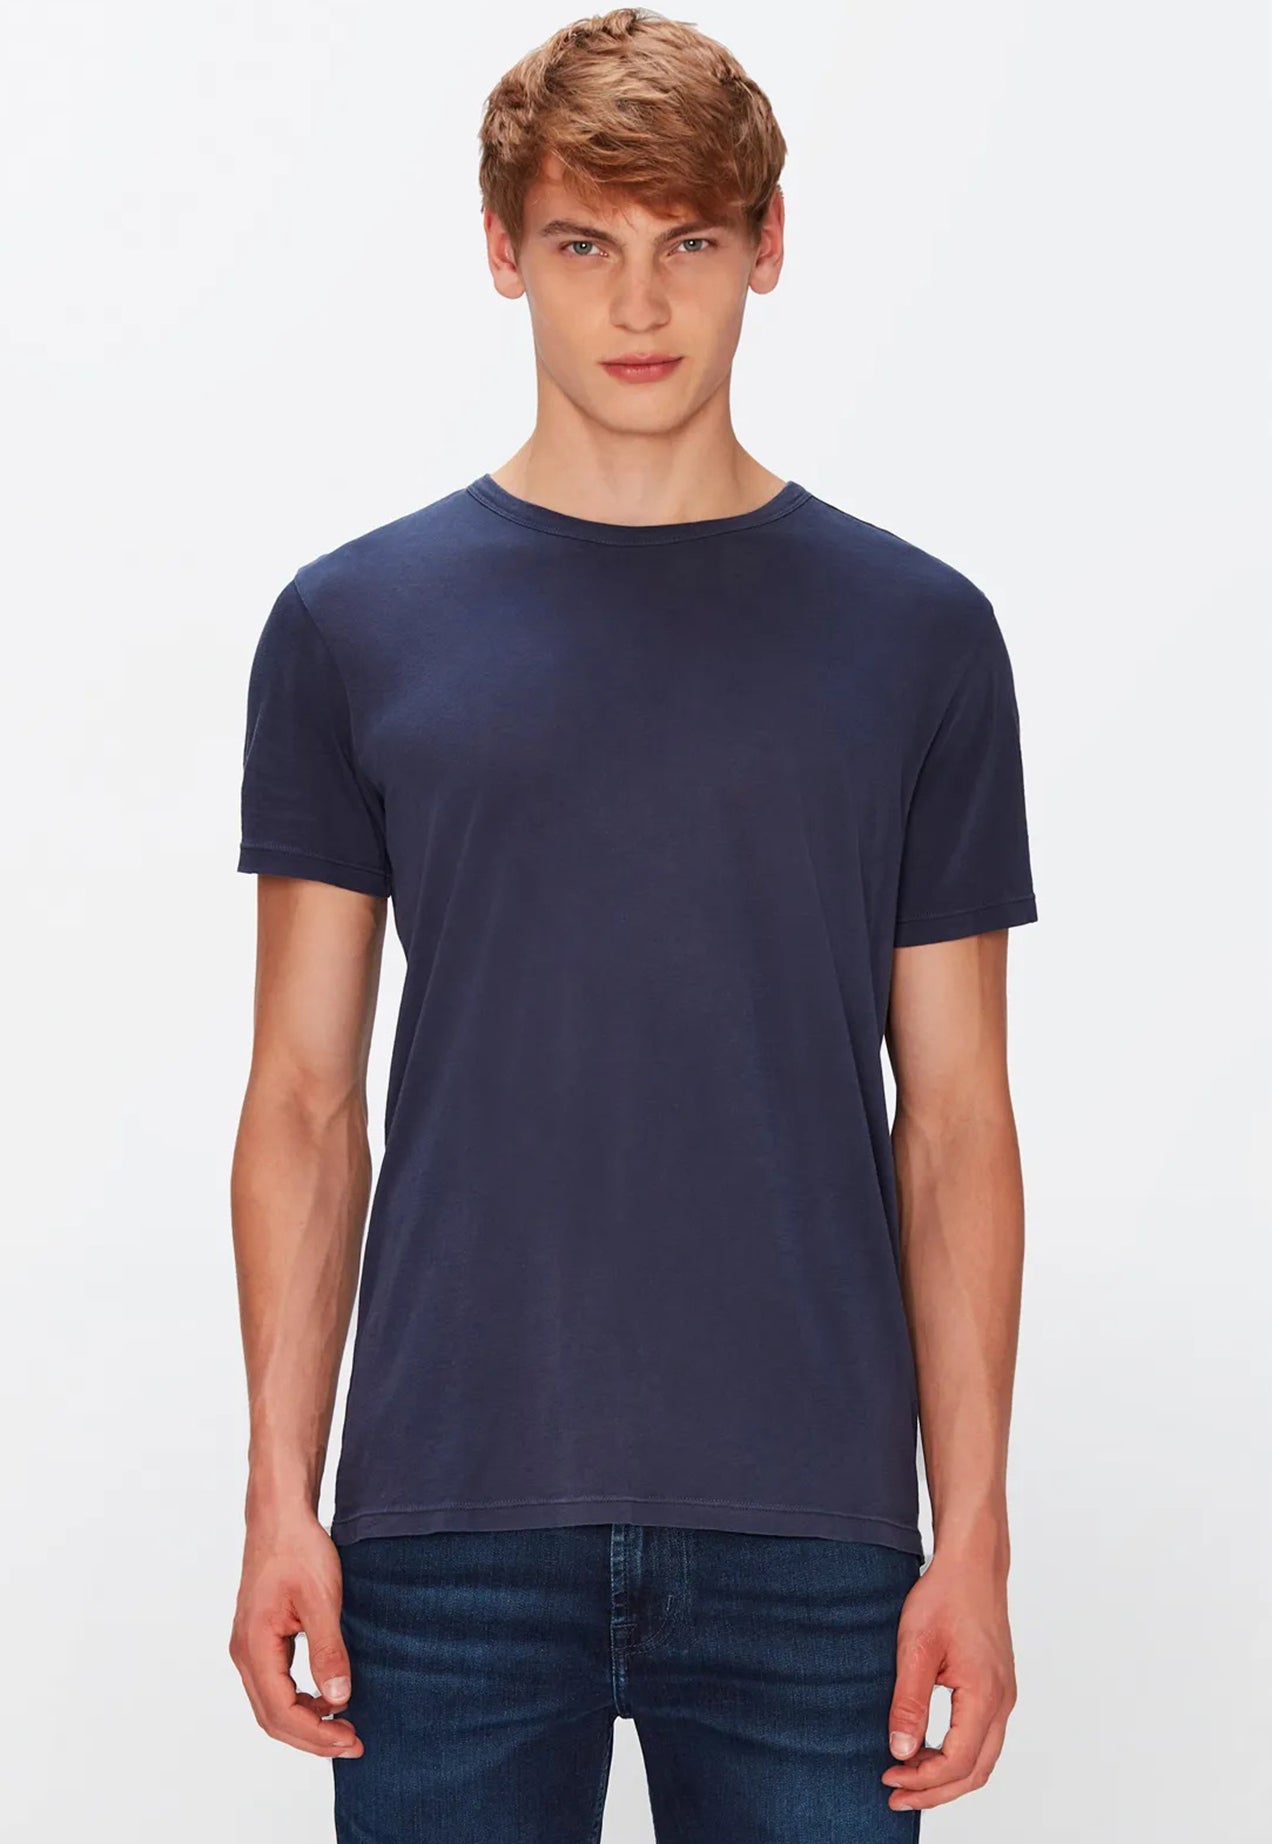 7 FOR ALL MANKIND - Featherweight Cotton T-shirt in Navy Blue JSLM6140BN